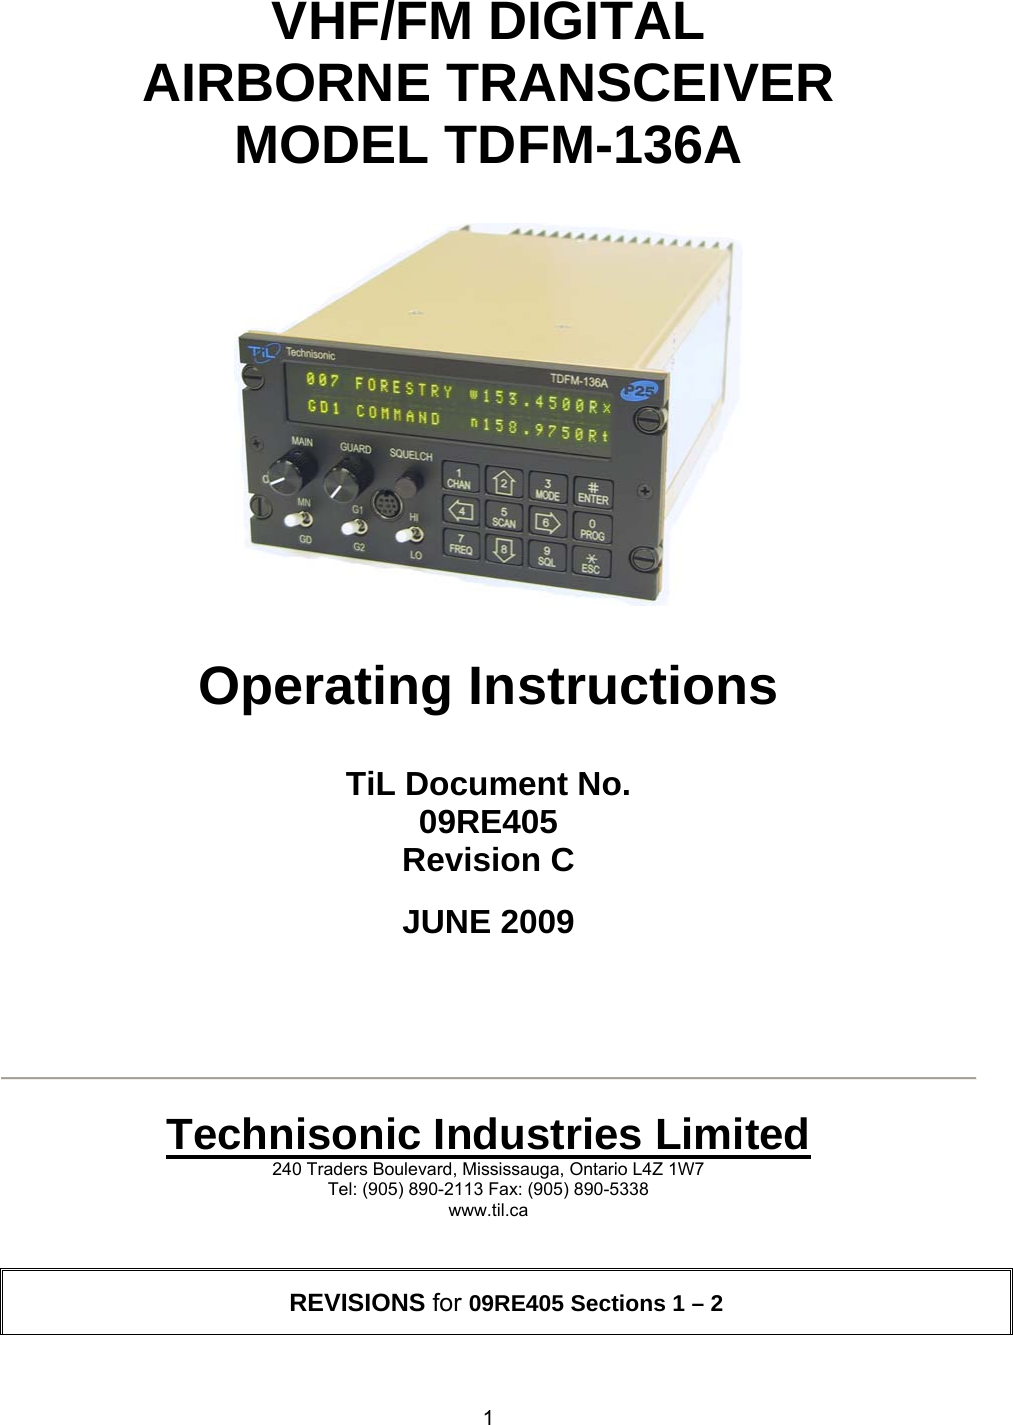  1   VHF/FM DIGITAL AIRBORNE TRANSCEIVER MODEL TDFM-136A      Operating Instructions   TiL Document No. 09RE405 Revision C  JUNE 2009        Technisonic Industries Limited 240 Traders Boulevard, Mississauga, Ontario L4Z 1W7 Tel: (905) 890-2113 Fax: (905) 890-5338 www.til.ca   REVISIONS for 09RE405 Sections 1 – 2 